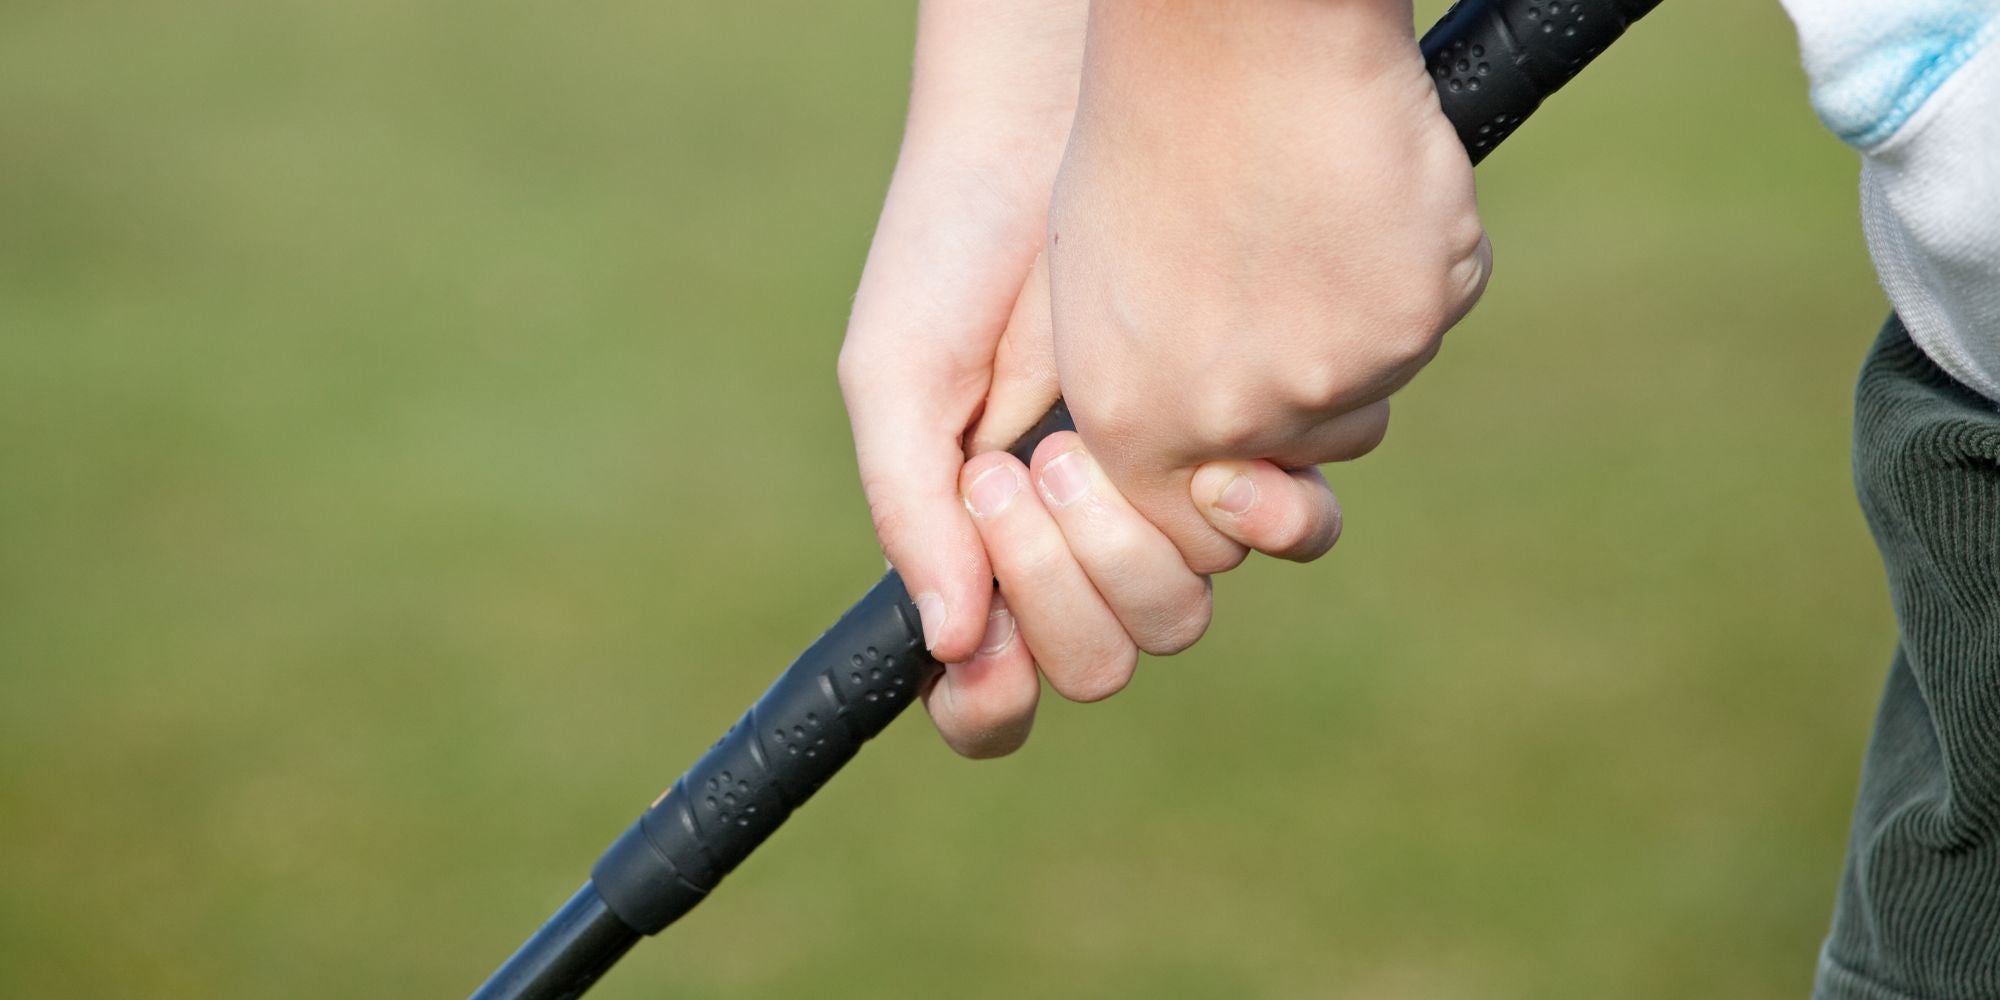 Grasping Grip Options for Your Golf Clubs